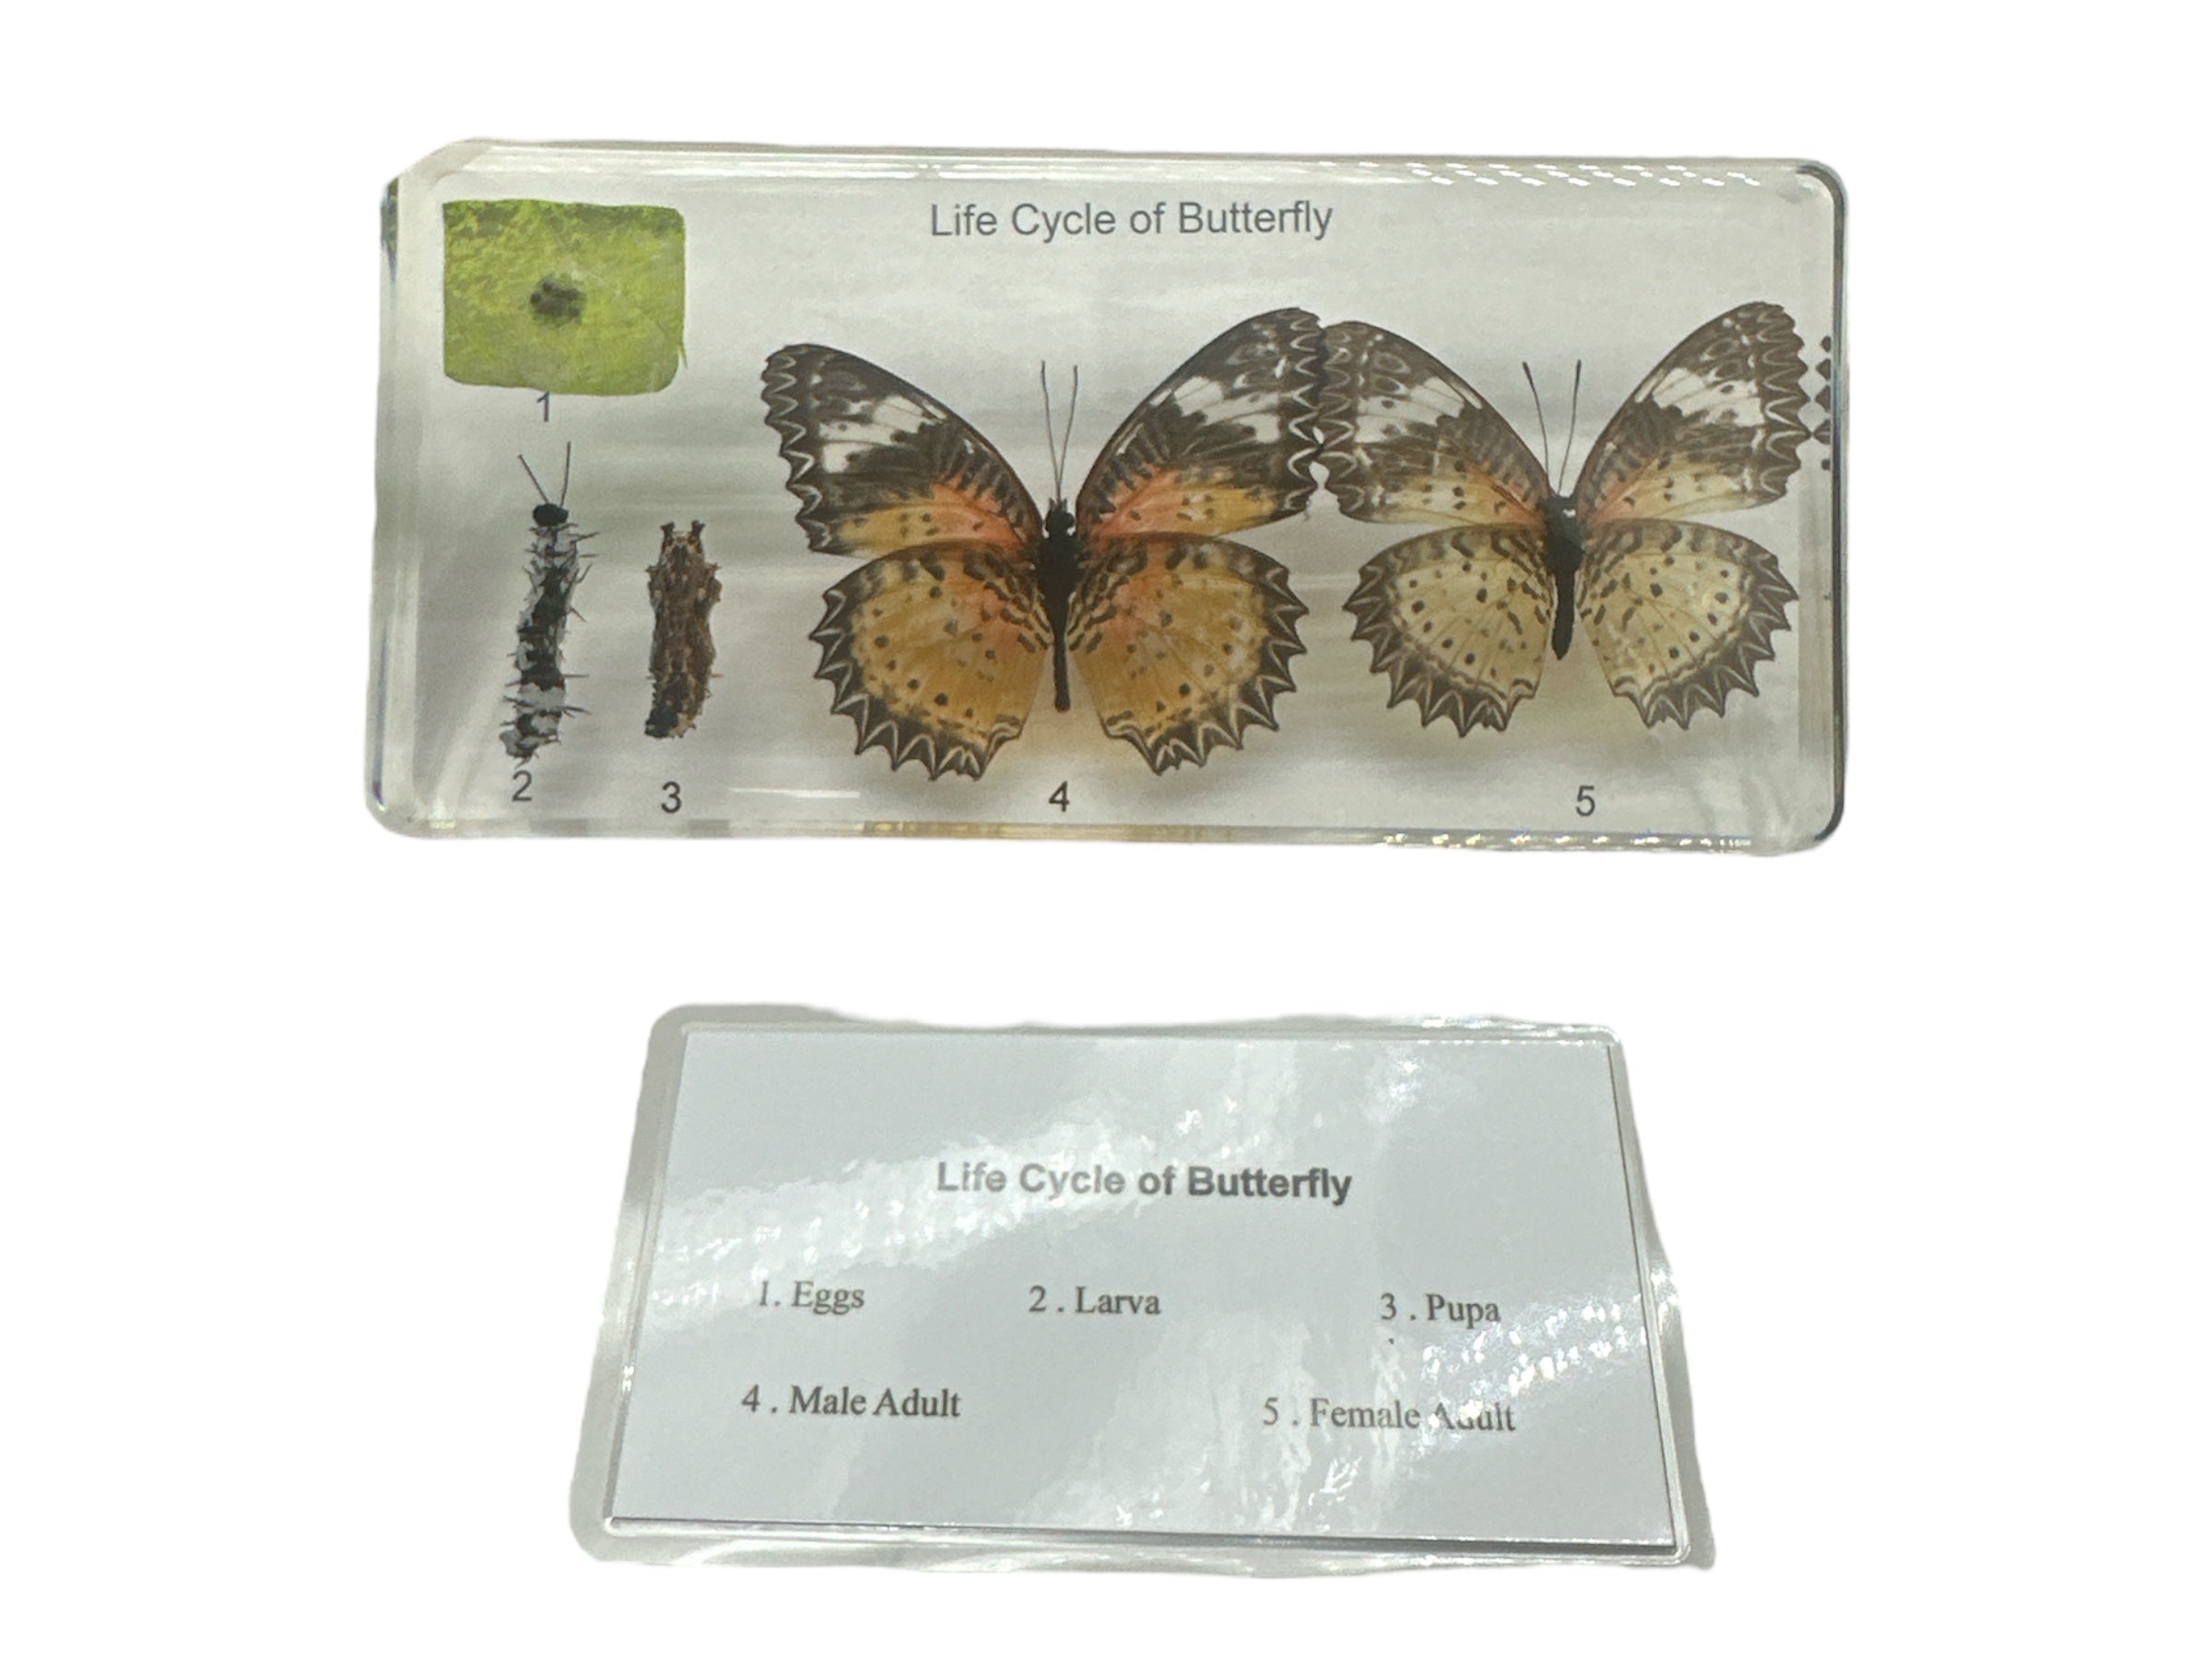 Butterfly Life Cycle - Specimen In Resin